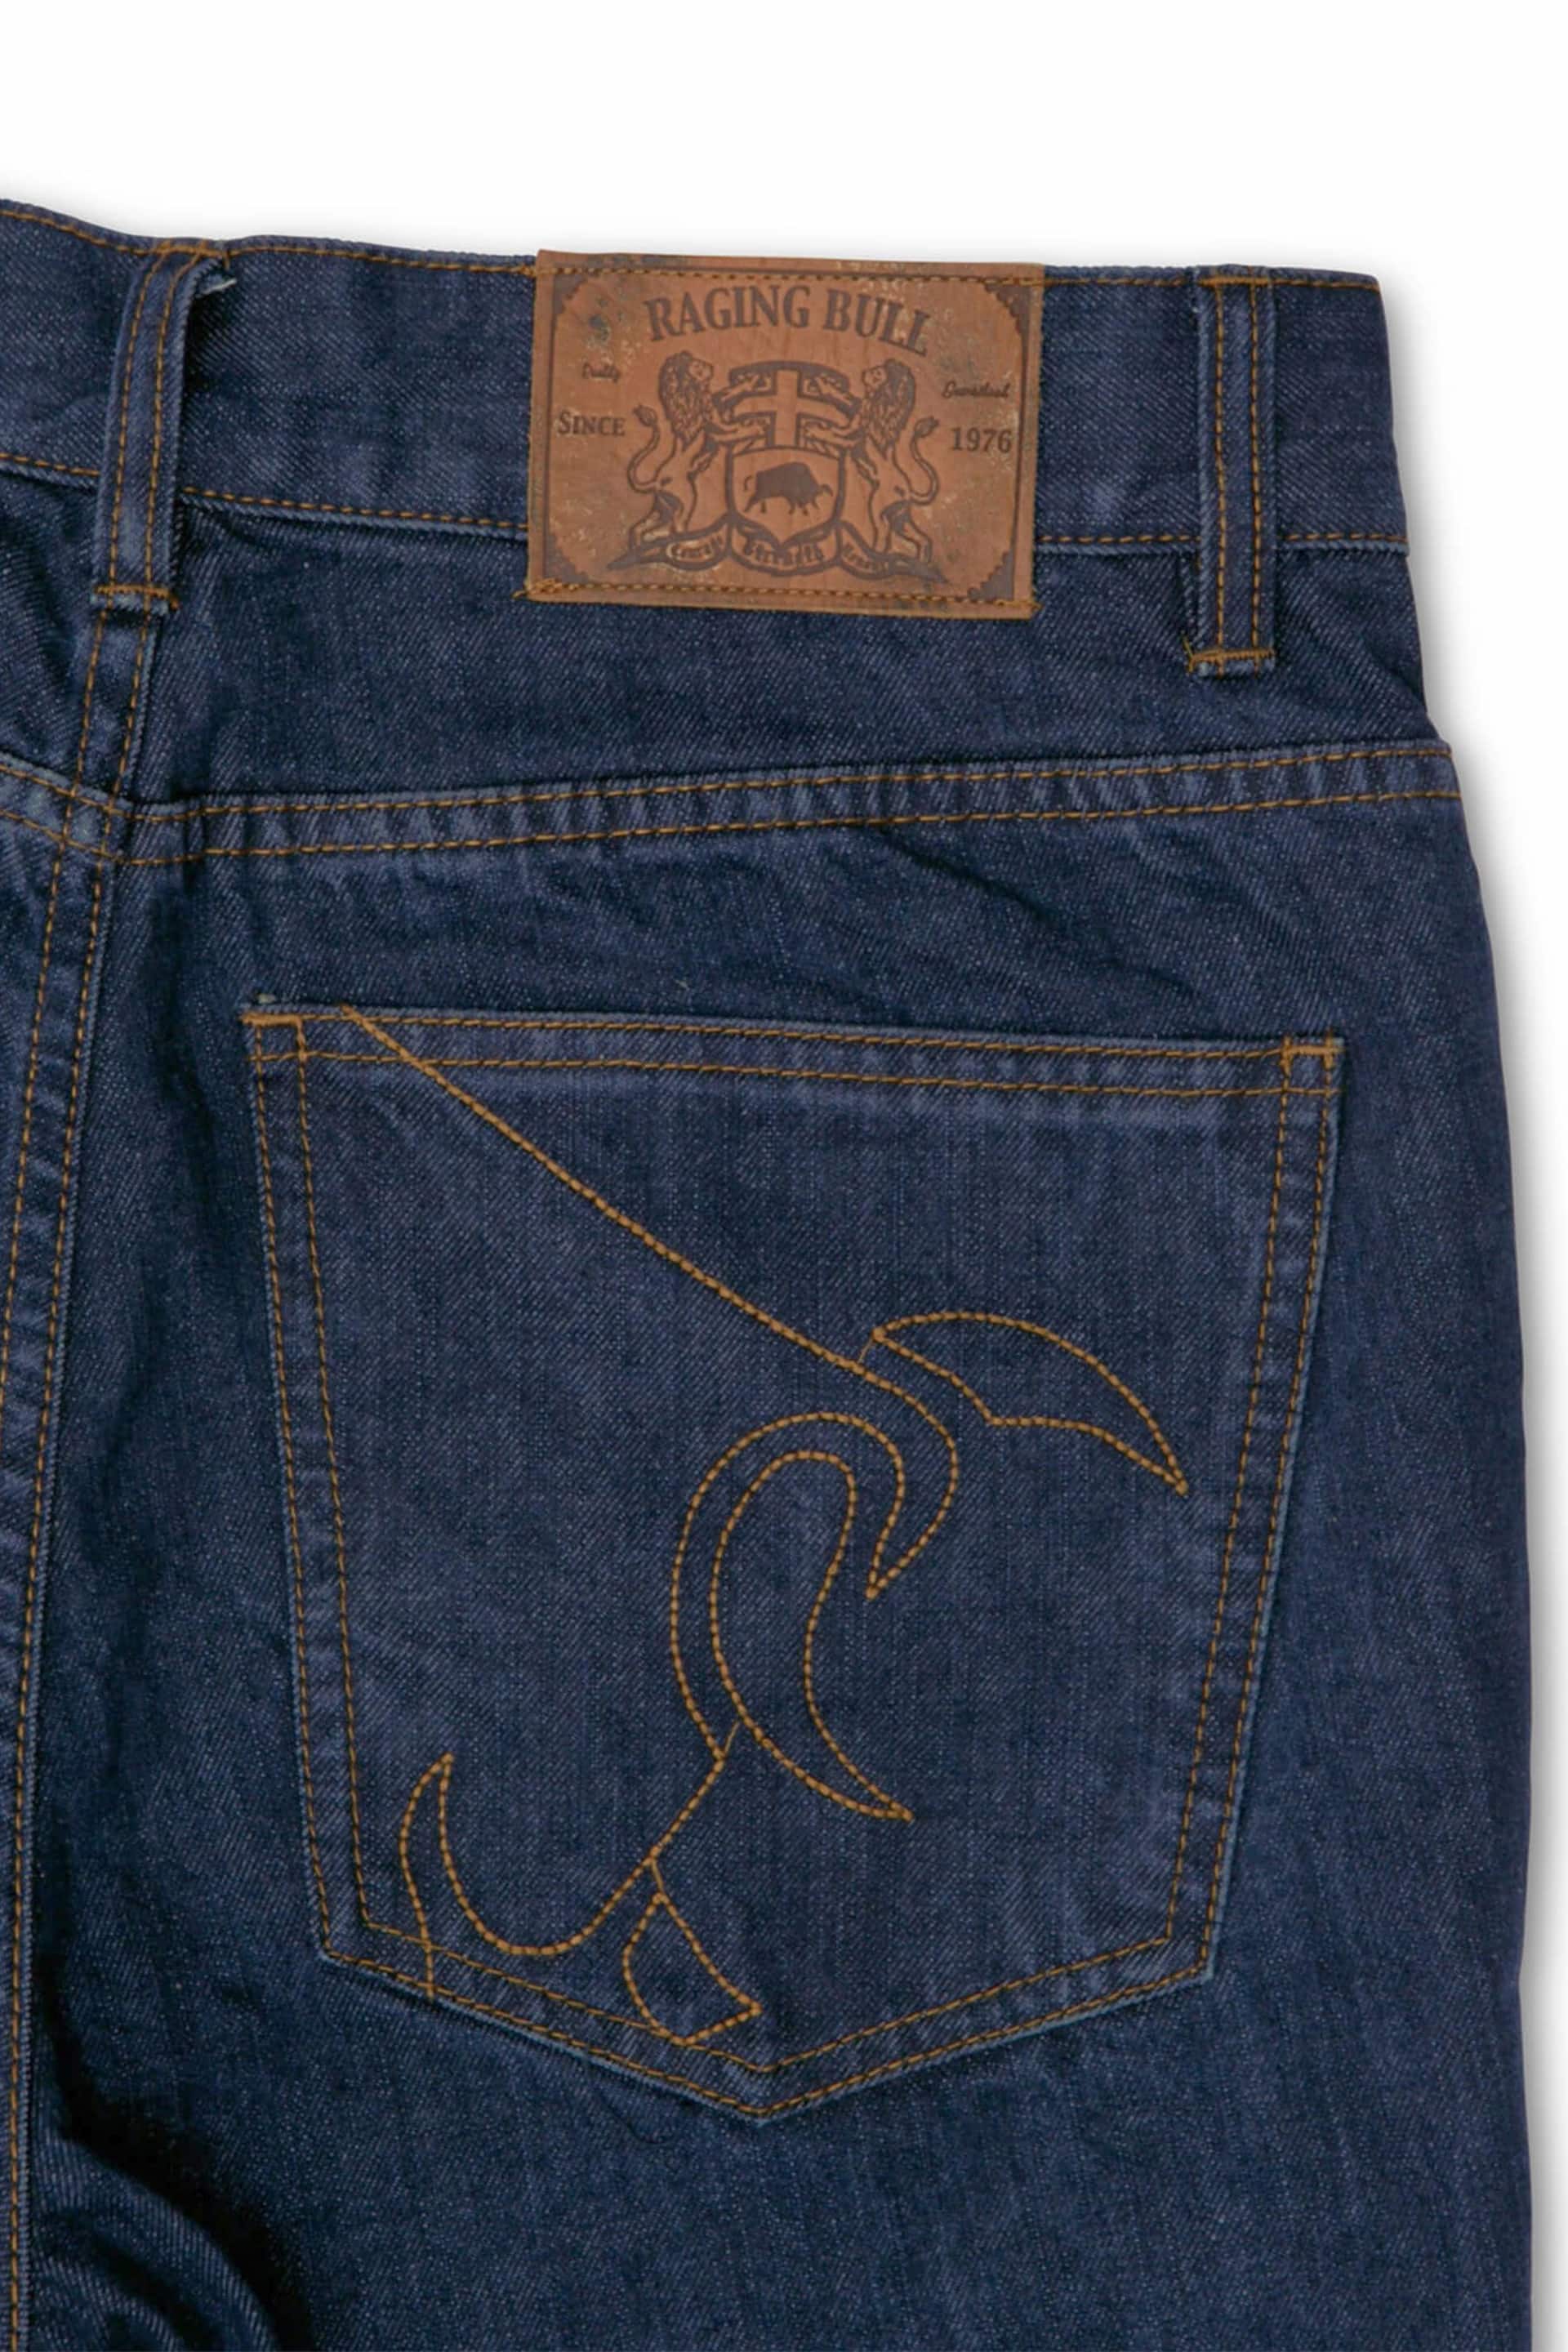 Raging Bull Blue Tapered Jeans - Image 4 of 6